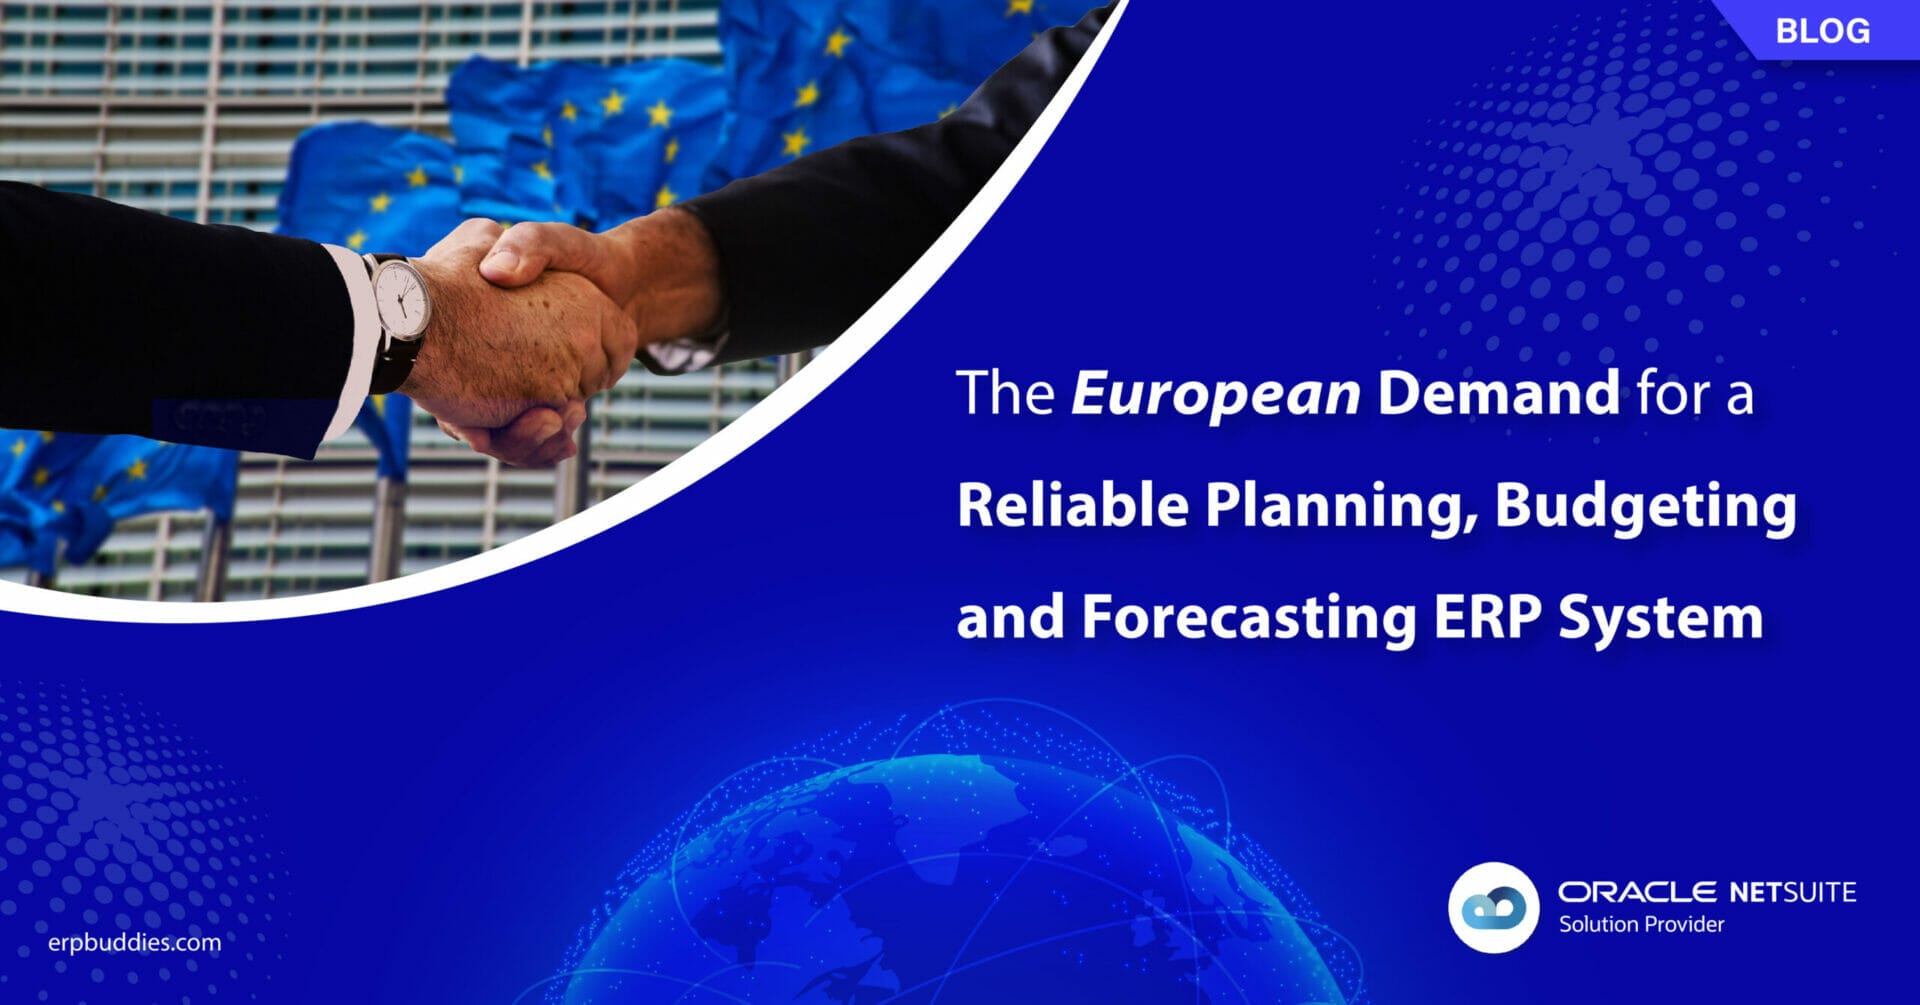 The European demand for a Reliable Planning, Budgeting & Forecasting ERP system